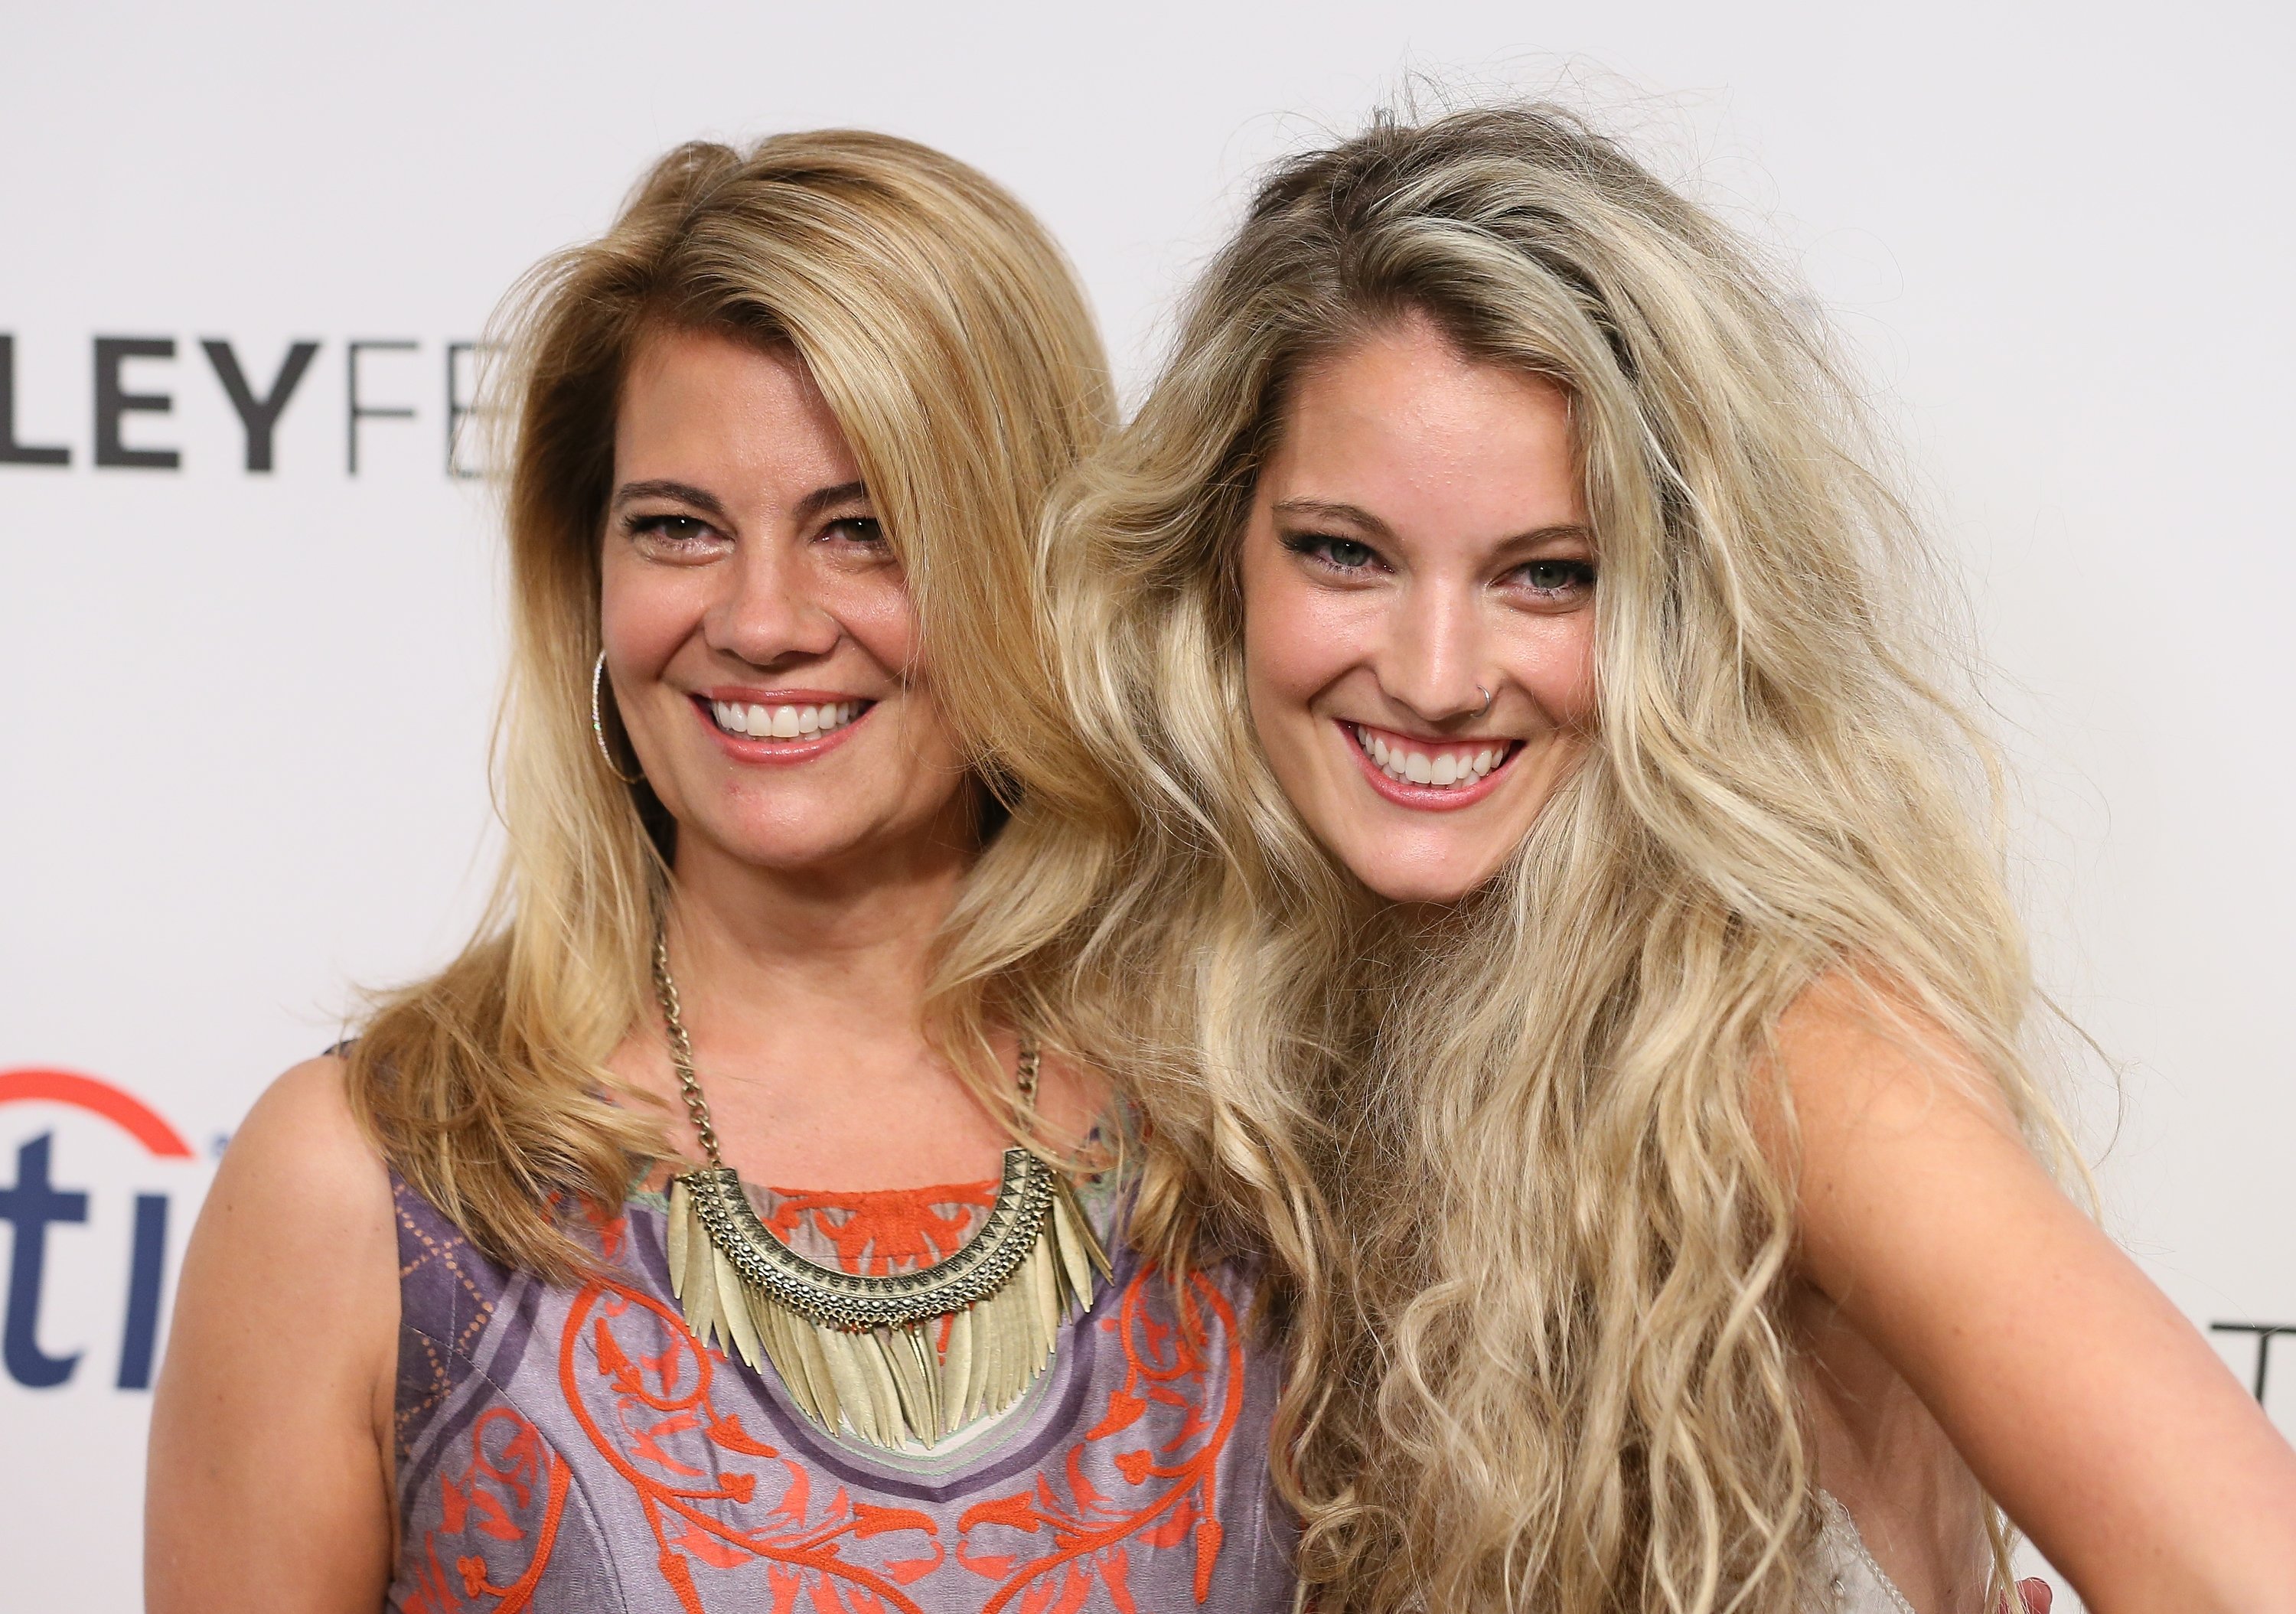 Lisa Whelchel and Clancy Cauble on September 15, 2014, in Beverly Hills, California. | Source: Getty Images